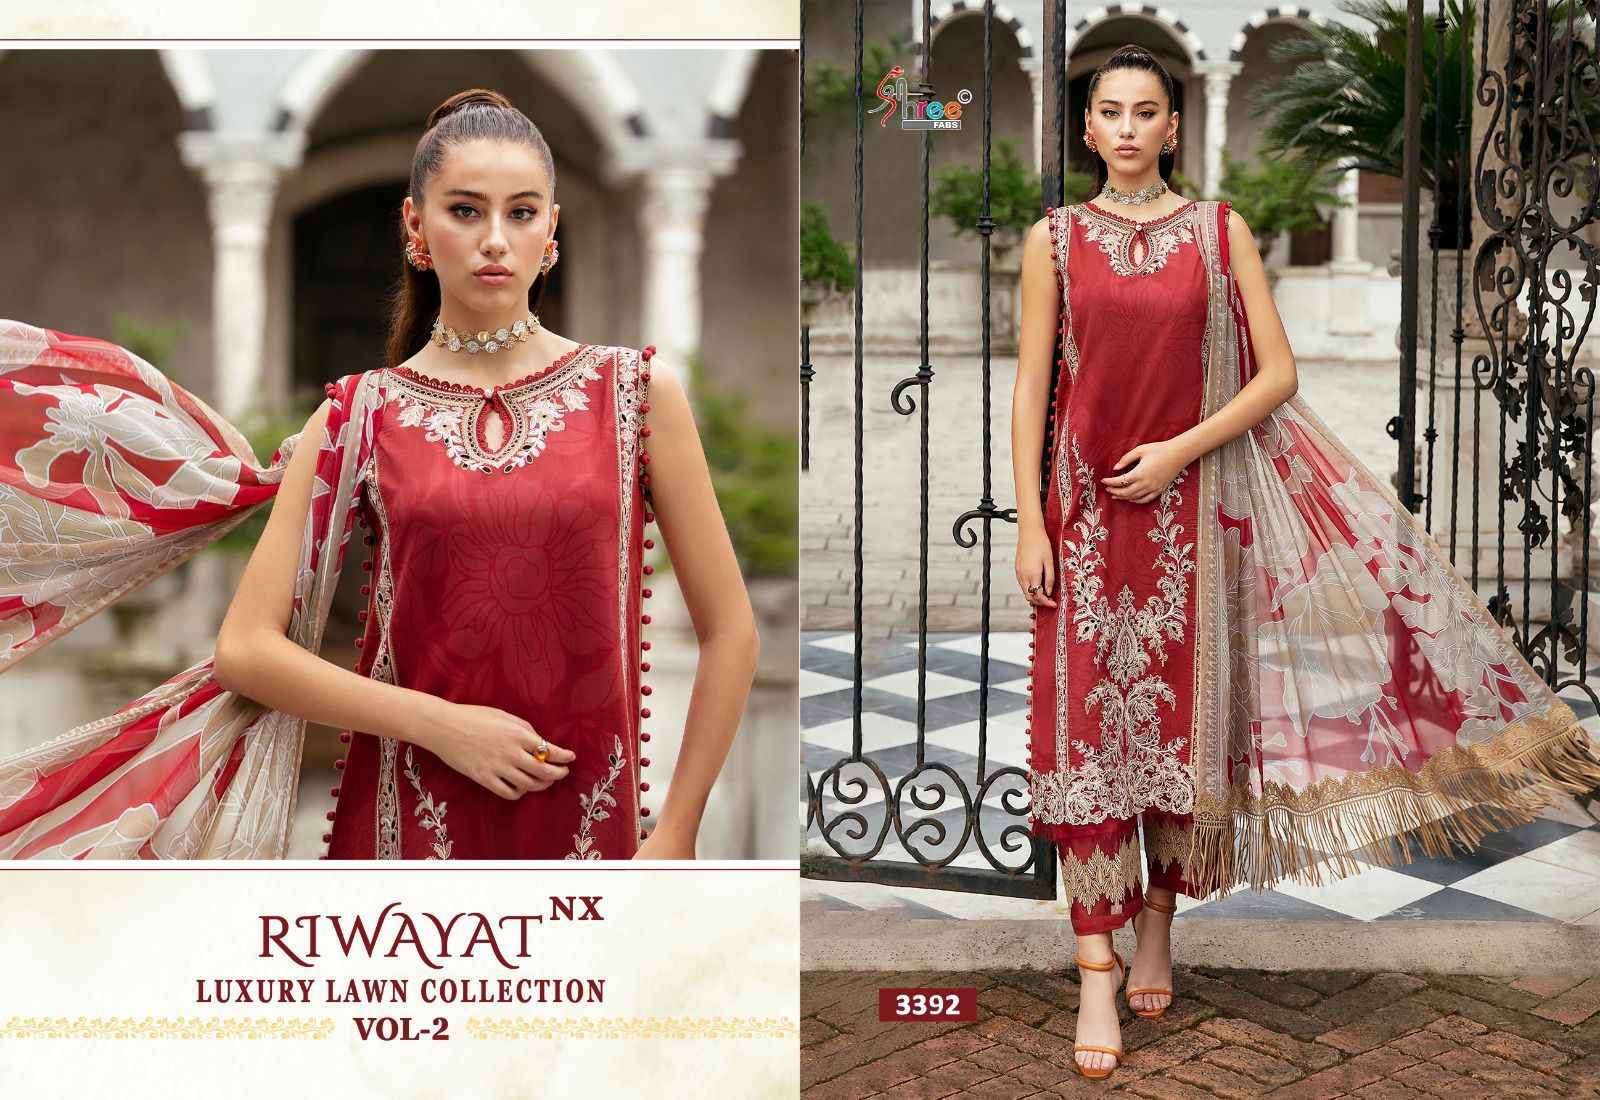 Shree Fabs Riwayat Luxury Lawn Collection Vol-2 NX Cotton Dress Material (5 pc Cataloge)